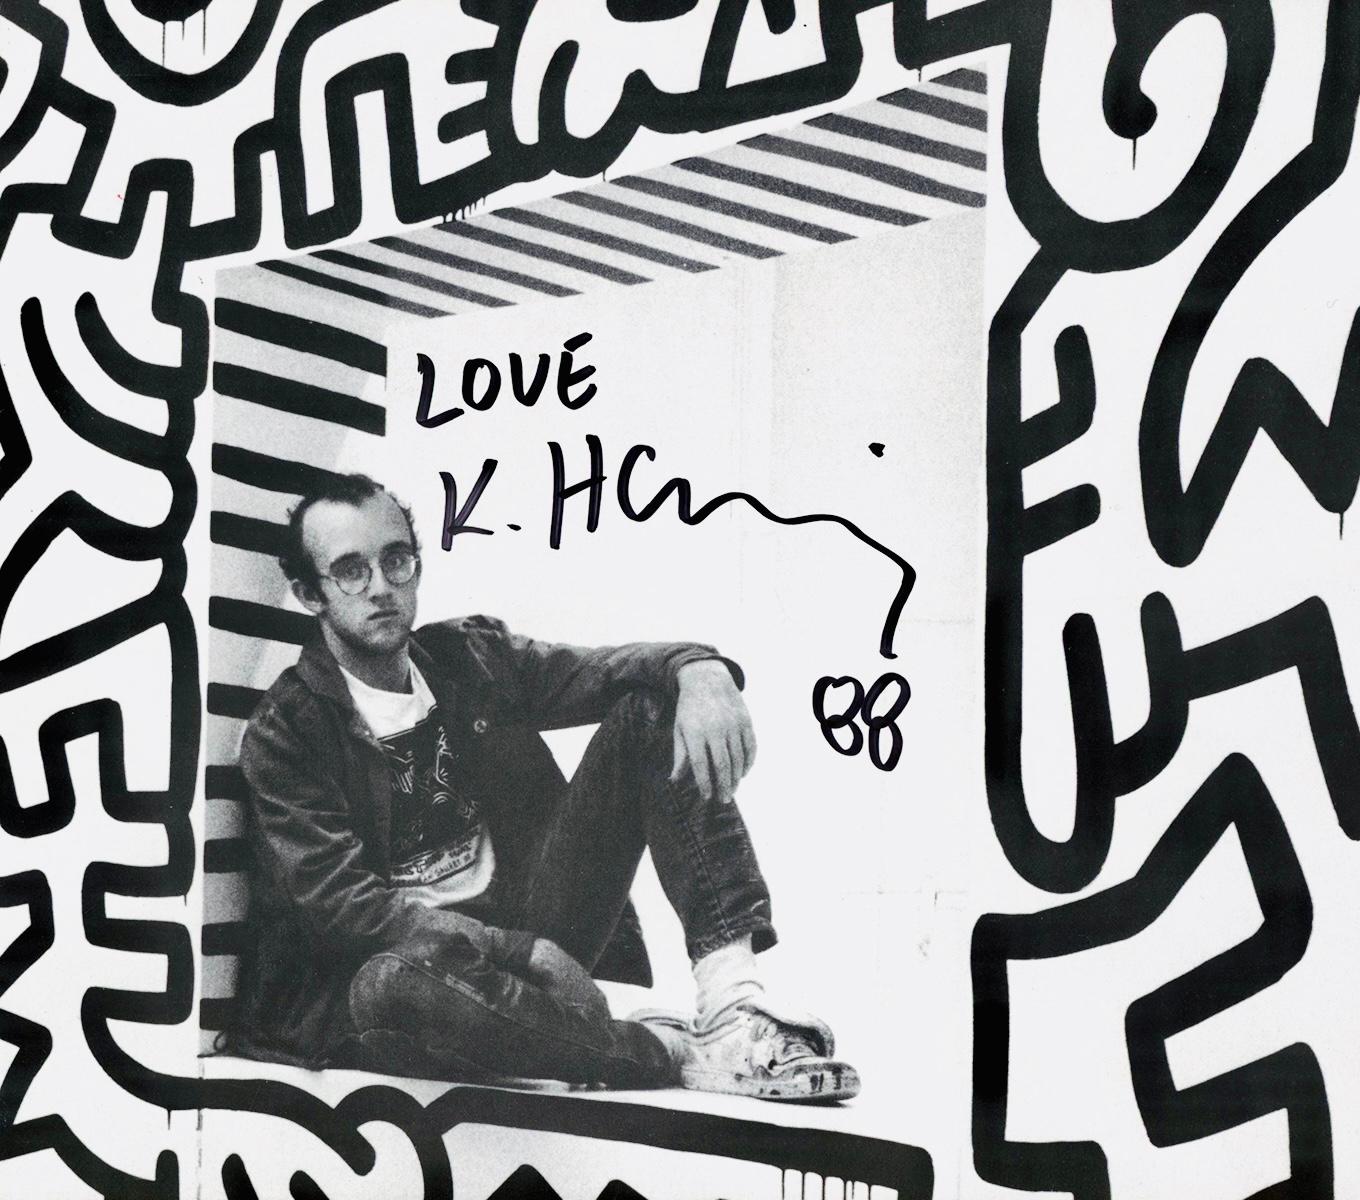 Signed Keith Haring Pop Shop poster 1988:
A historical 1980s Keith Haring Pop Shop poster/fold out catalog (reverse), endearingly inscribed, ‘Love K. Haring 88’ in black marker with the artist’s signature crossed circle.

Imagery: Tseng Kwong Chi’s,